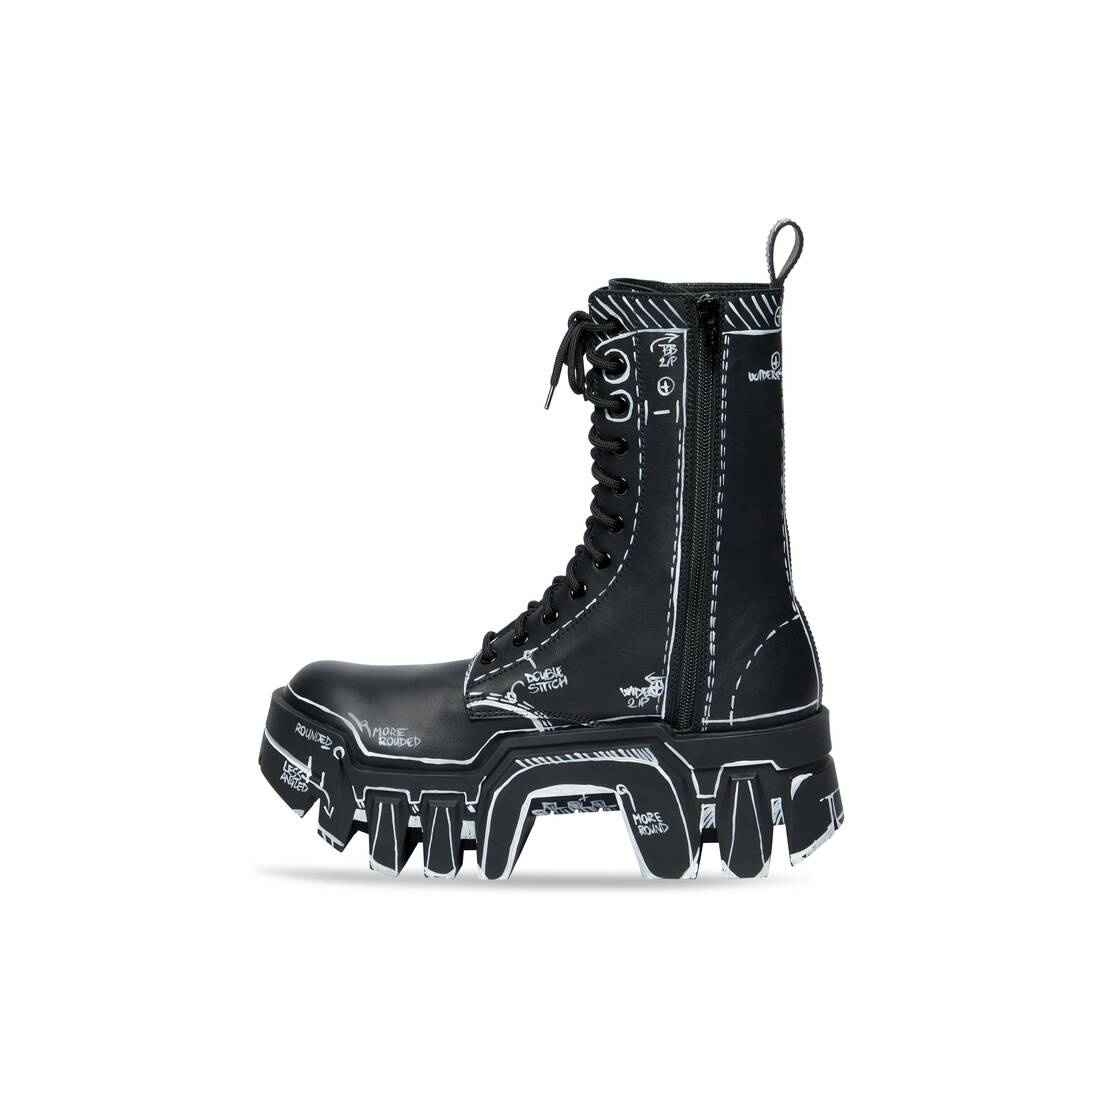 Women's Bulldozer Lace-up Boot  in Black - 4